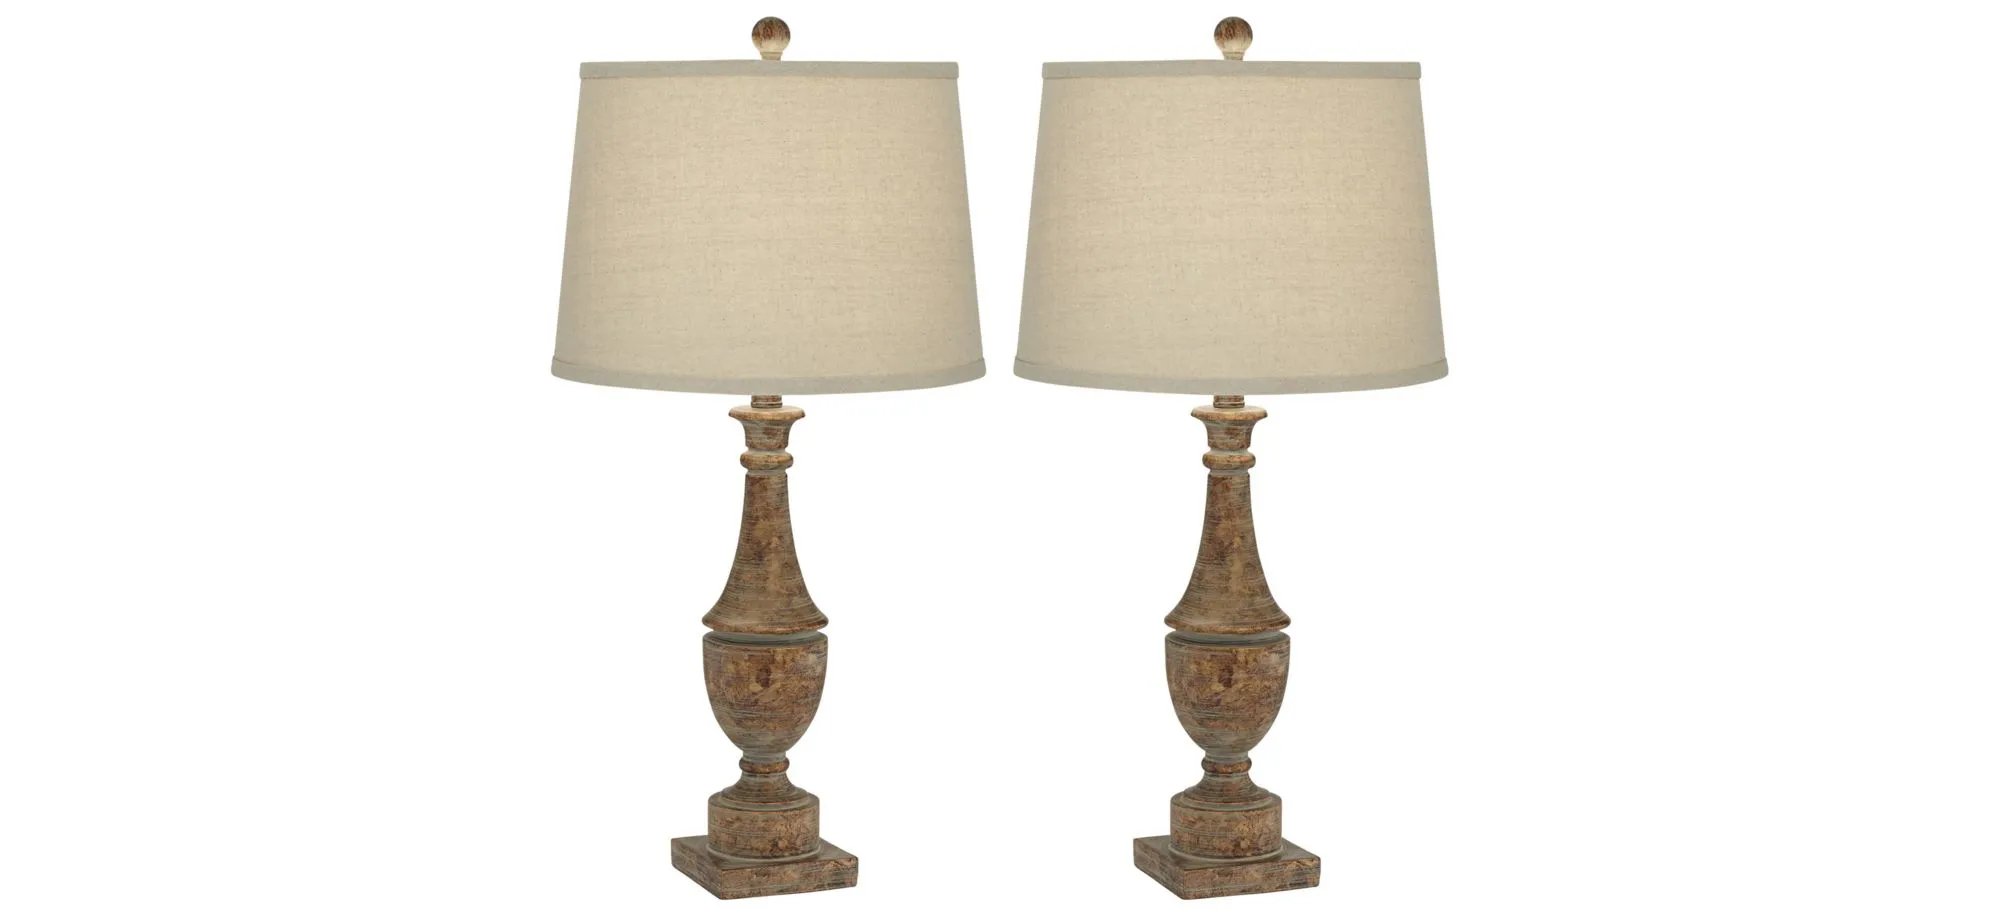 Collier Table Lamps: Set of 2 in Bronze w/ aged Patina by Pacific Coast